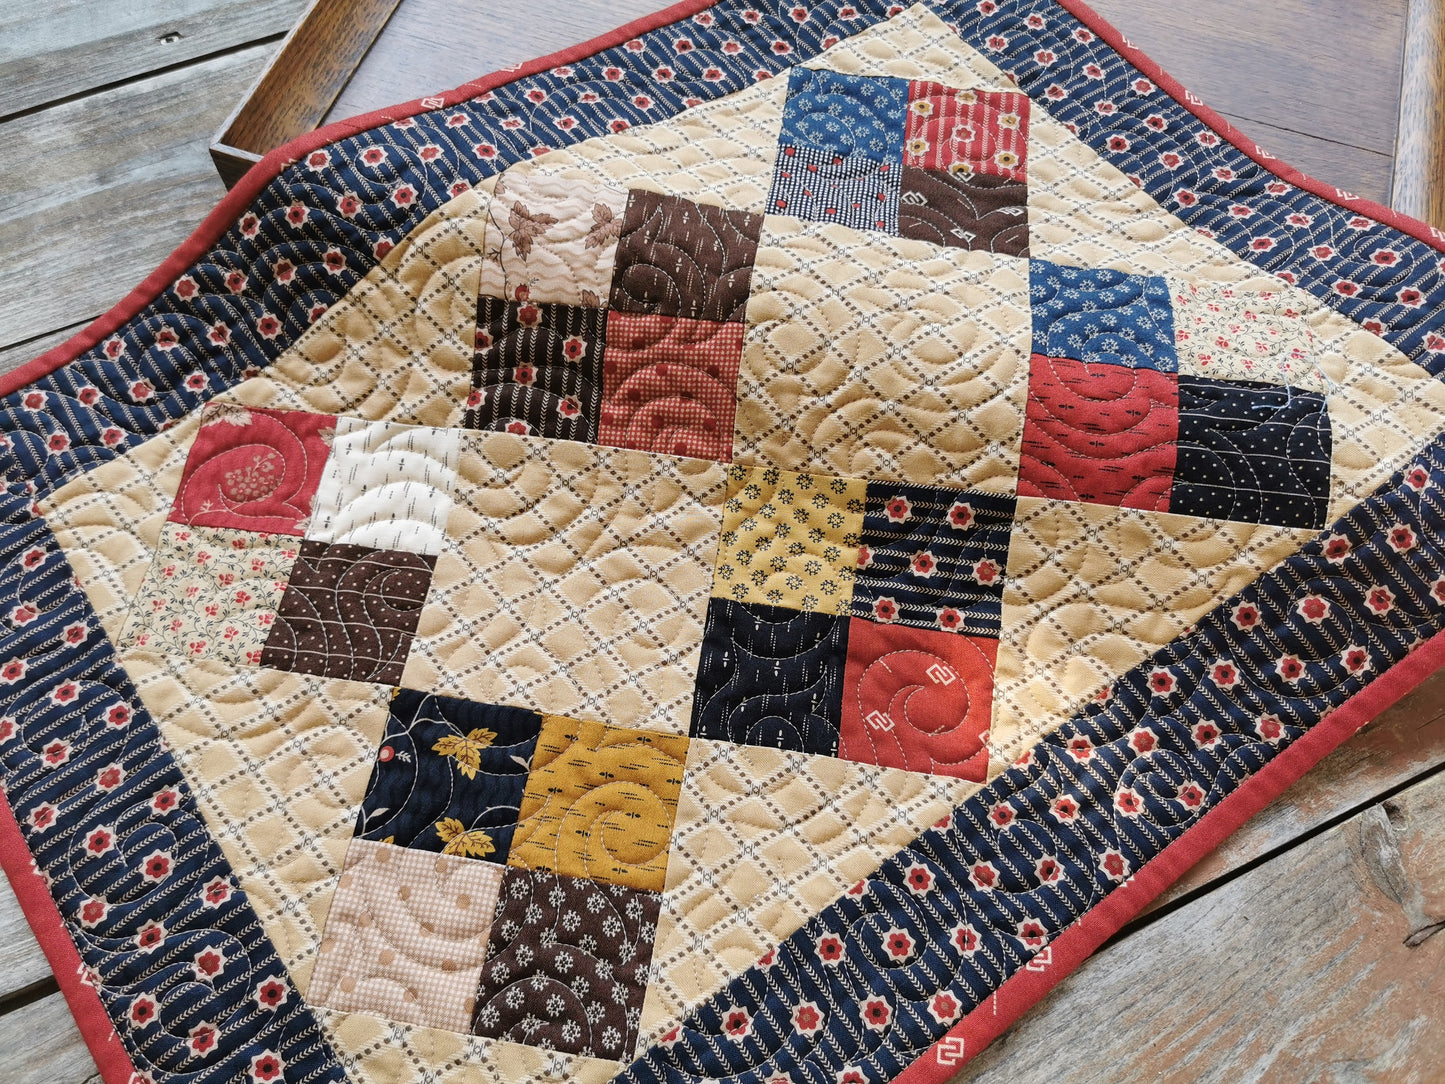 The quilted table runner is pictured on a slight angle to showcase the swirl quilting , which adds nice texture. Scrappy fabrics are civil war reproduction prints.